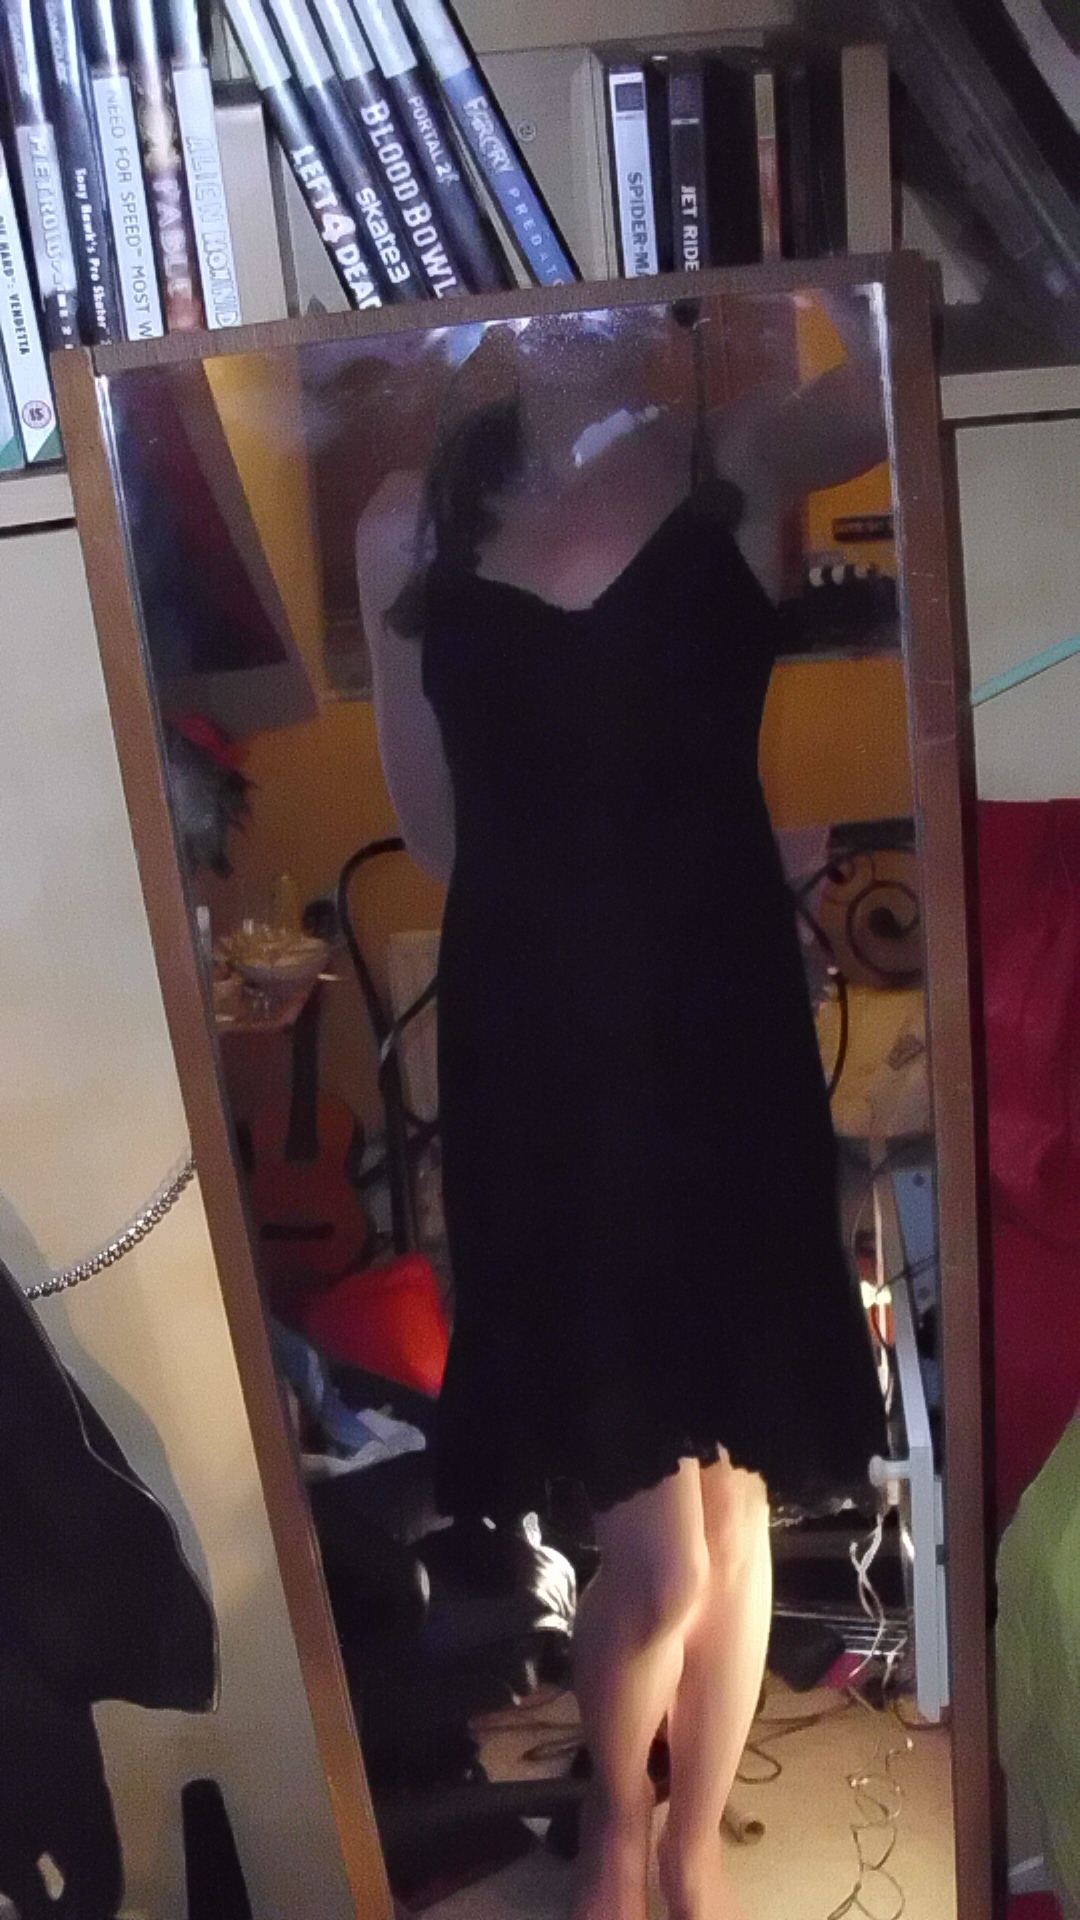 New dress! Wheeeeee~ I plan to alter all these new clothes to make them *extra*